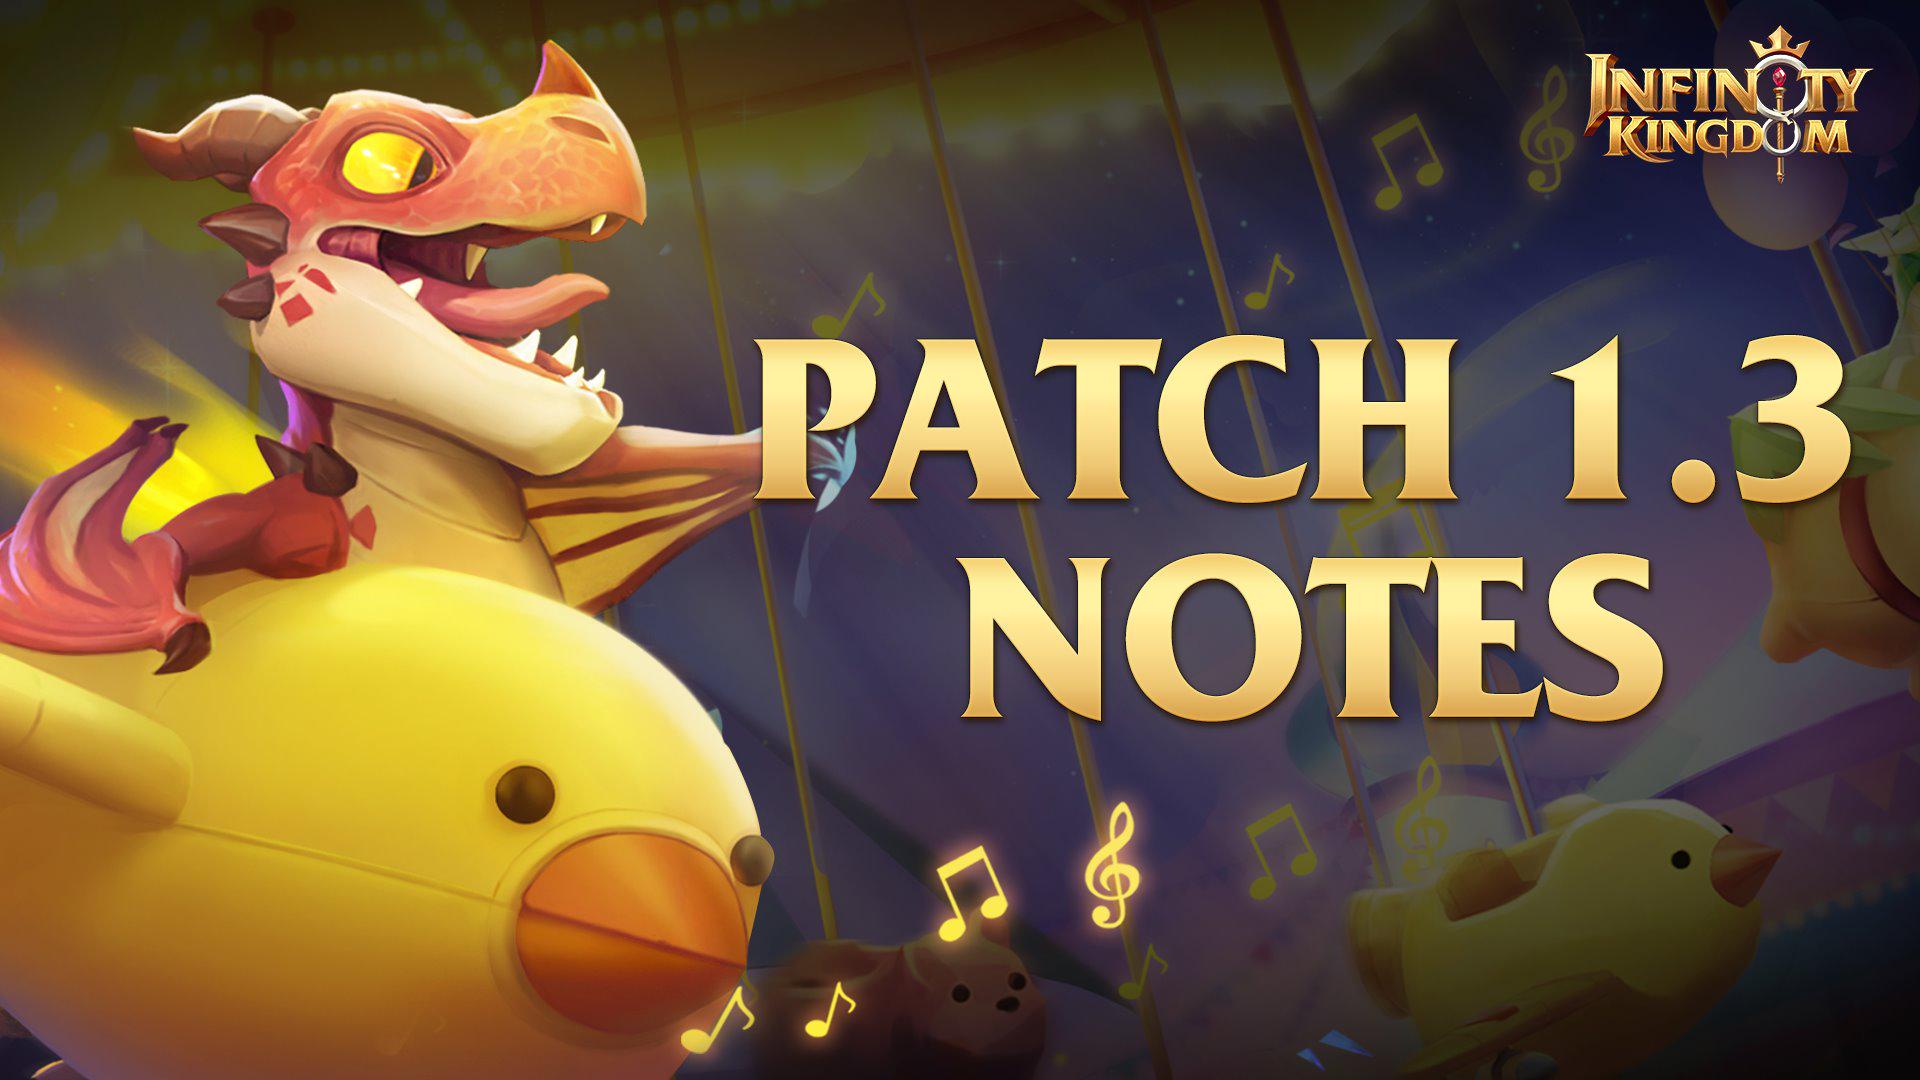 Available notes